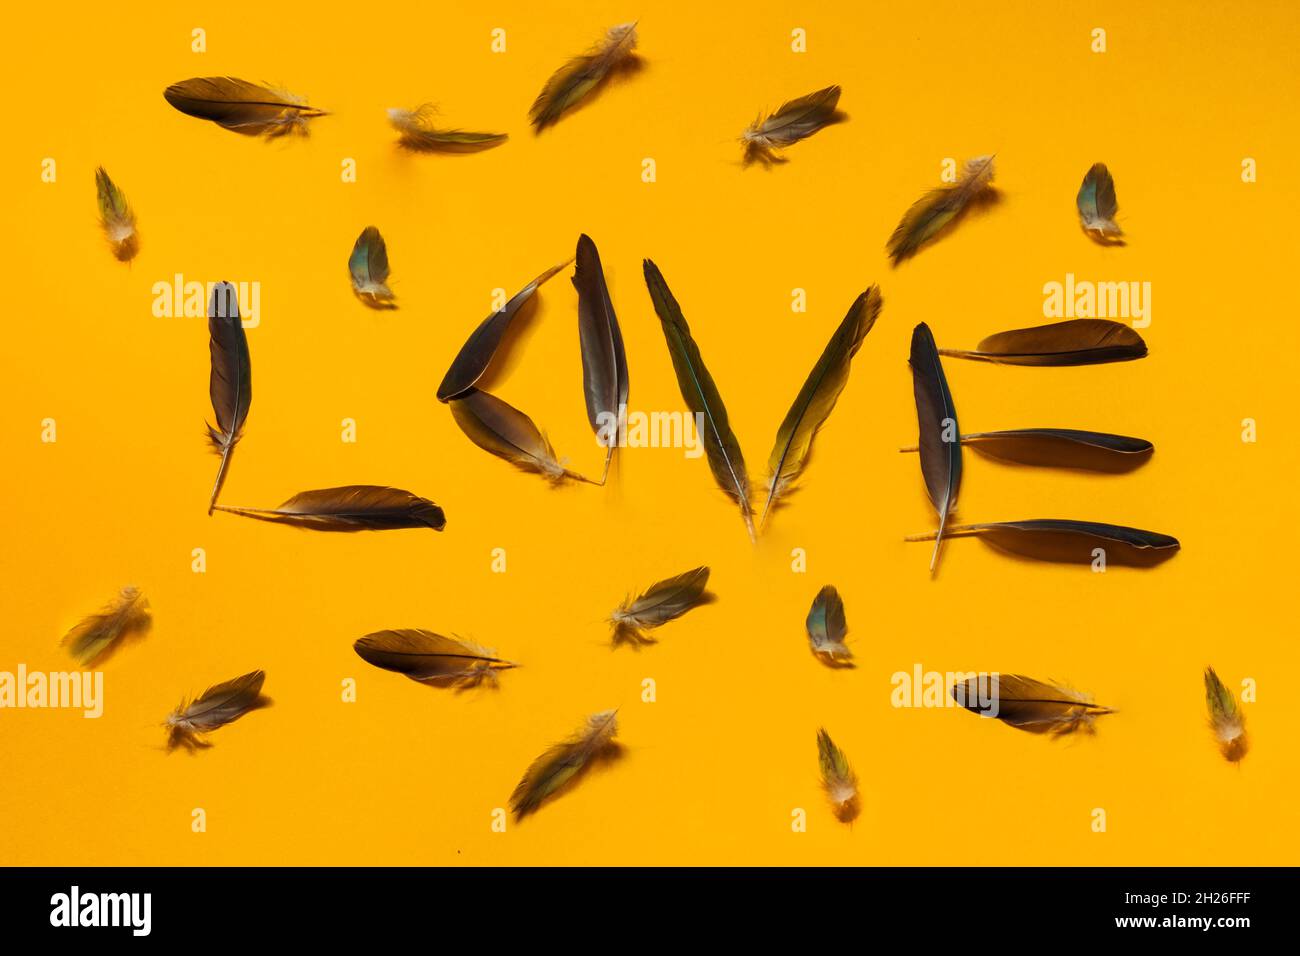 The word love, made of bird feathers, lies on a yellow background. Stock Photo